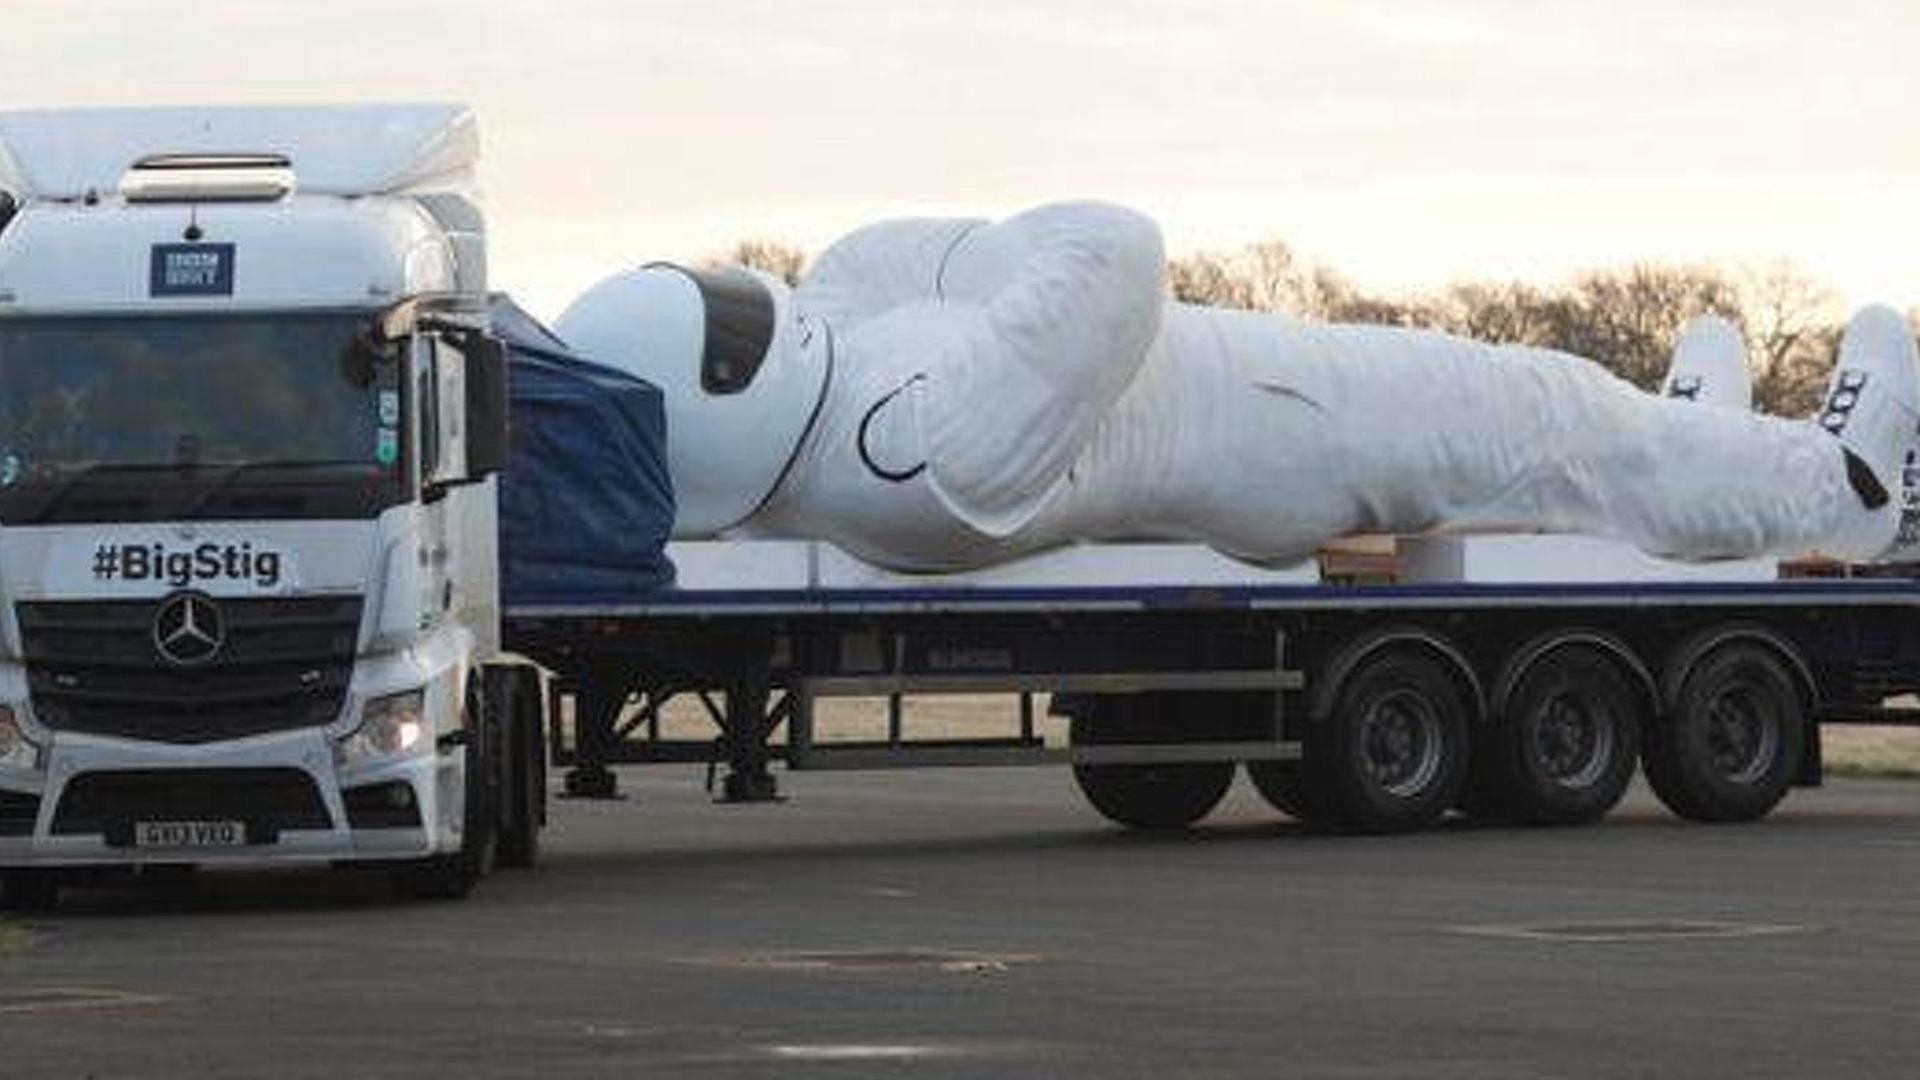 1920x1080 Big Stig is a 9 meter / 30 foot tall statue heading to Warsaw, Poland |  Motor1.com Photos